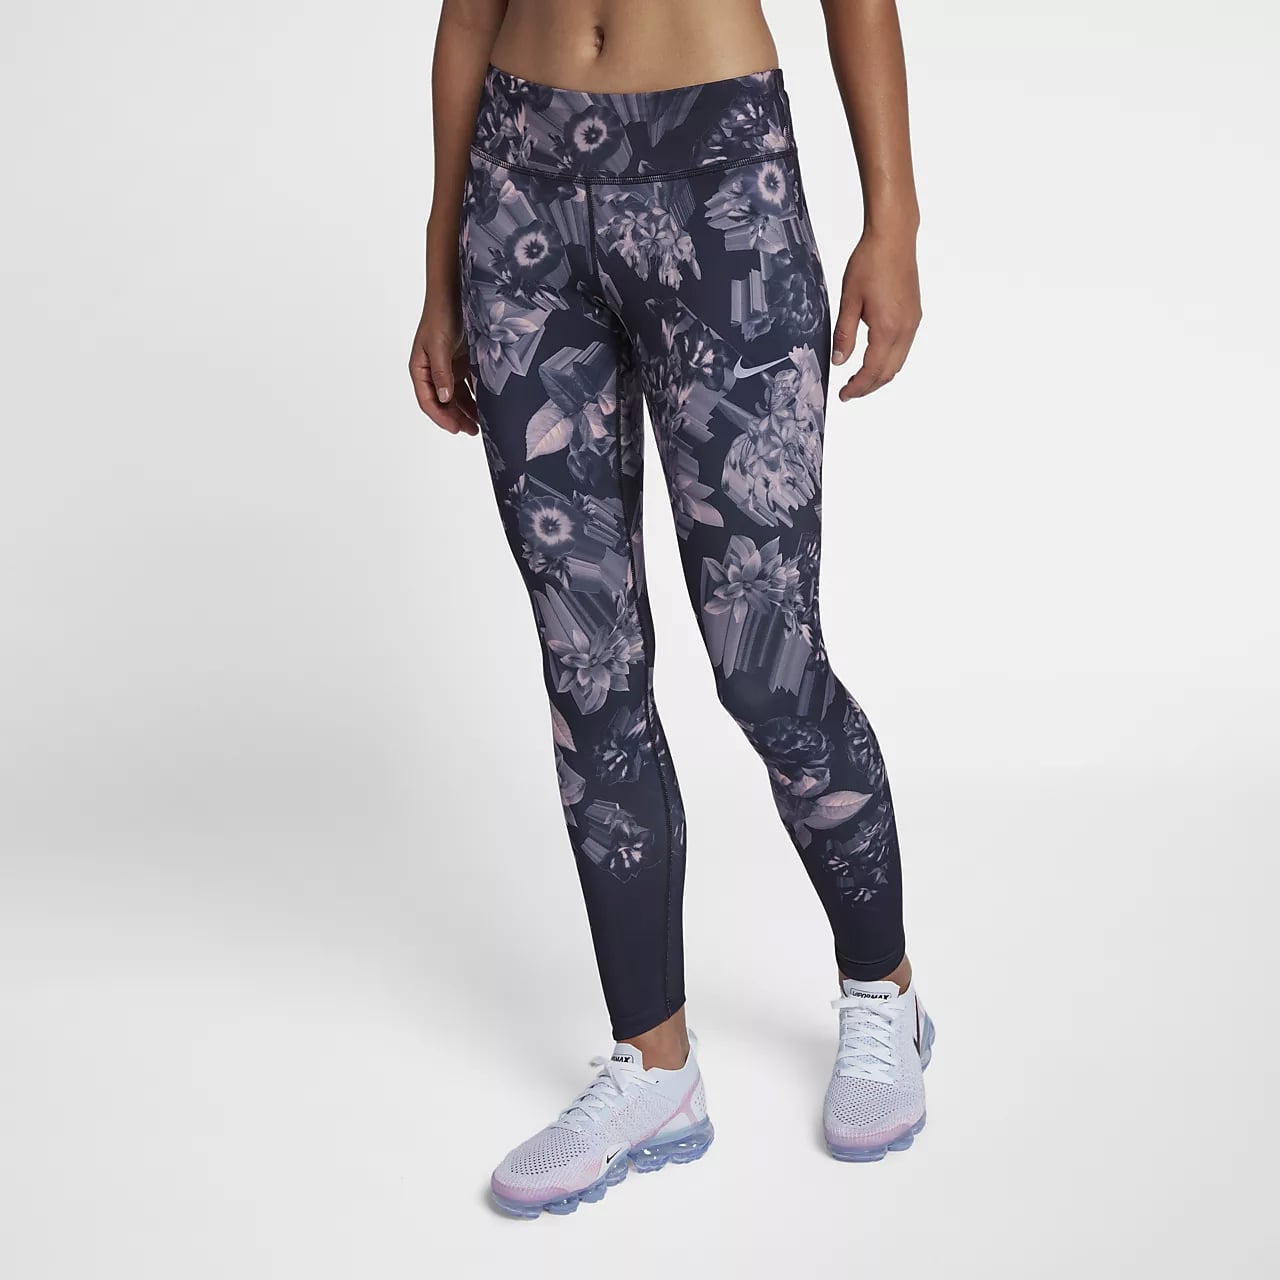 Nike Epic Lux Women's Mid-Rise Running Tights 40+ Fitness Gifts Are So F*cking Awesome, You'll Want Them All For Yourself | POPSUGAR Fitness Photo 40